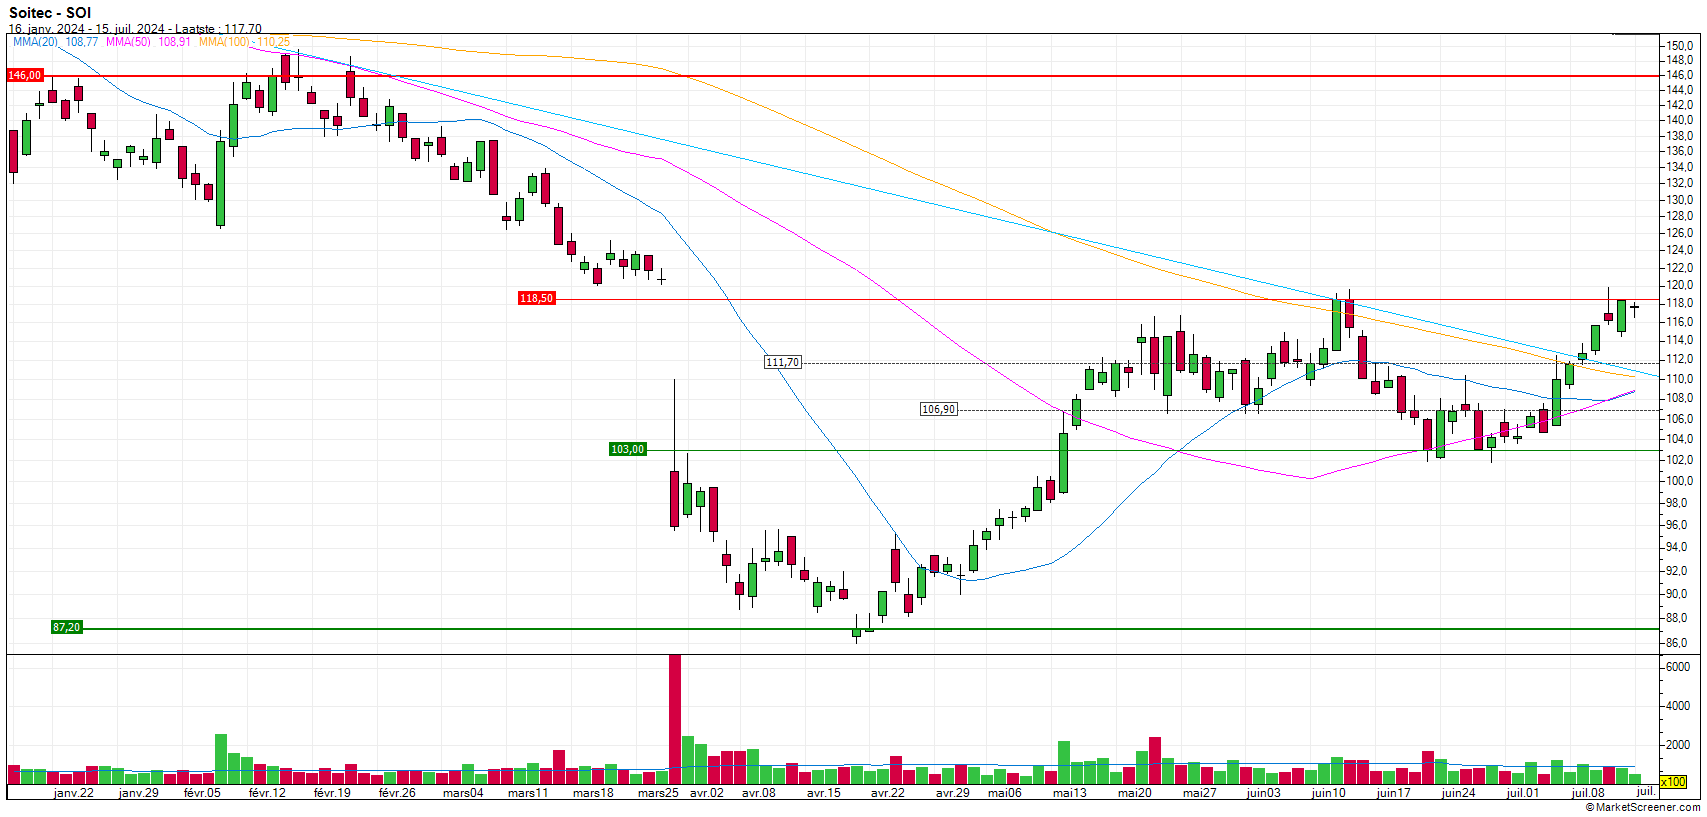 https://www.zonebourse.com/zbcache/charts/ObjectChart.aspx?Name=4695&Type=Custom&Intraday=1&Width=1707&Height=817&Cycle=DAY1&Duration=6&ShowCopyright=2&Company=Skin:Alex_nl&ShowName=1&ShowDate=1&Show&Render=Candle&NoRedirect=1